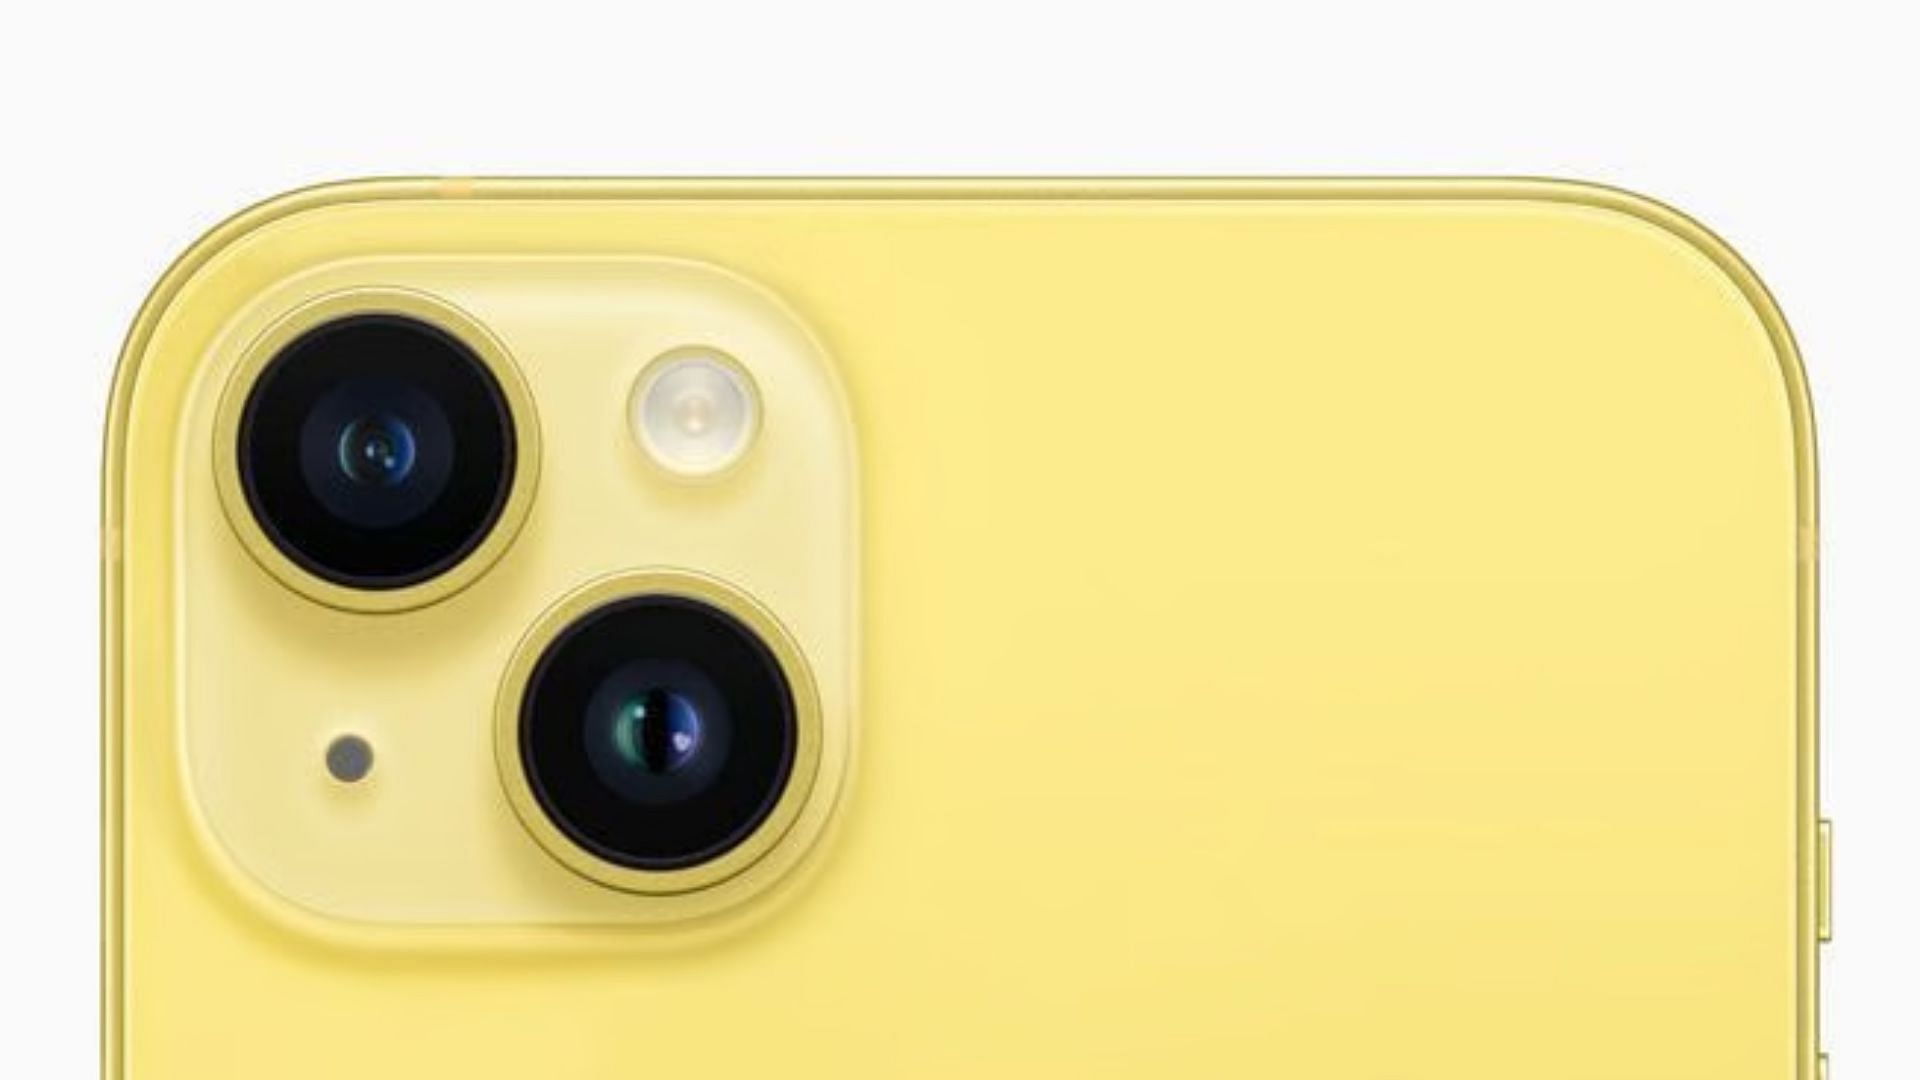 The camera module of the new yellow iPhone (Image via Apple)